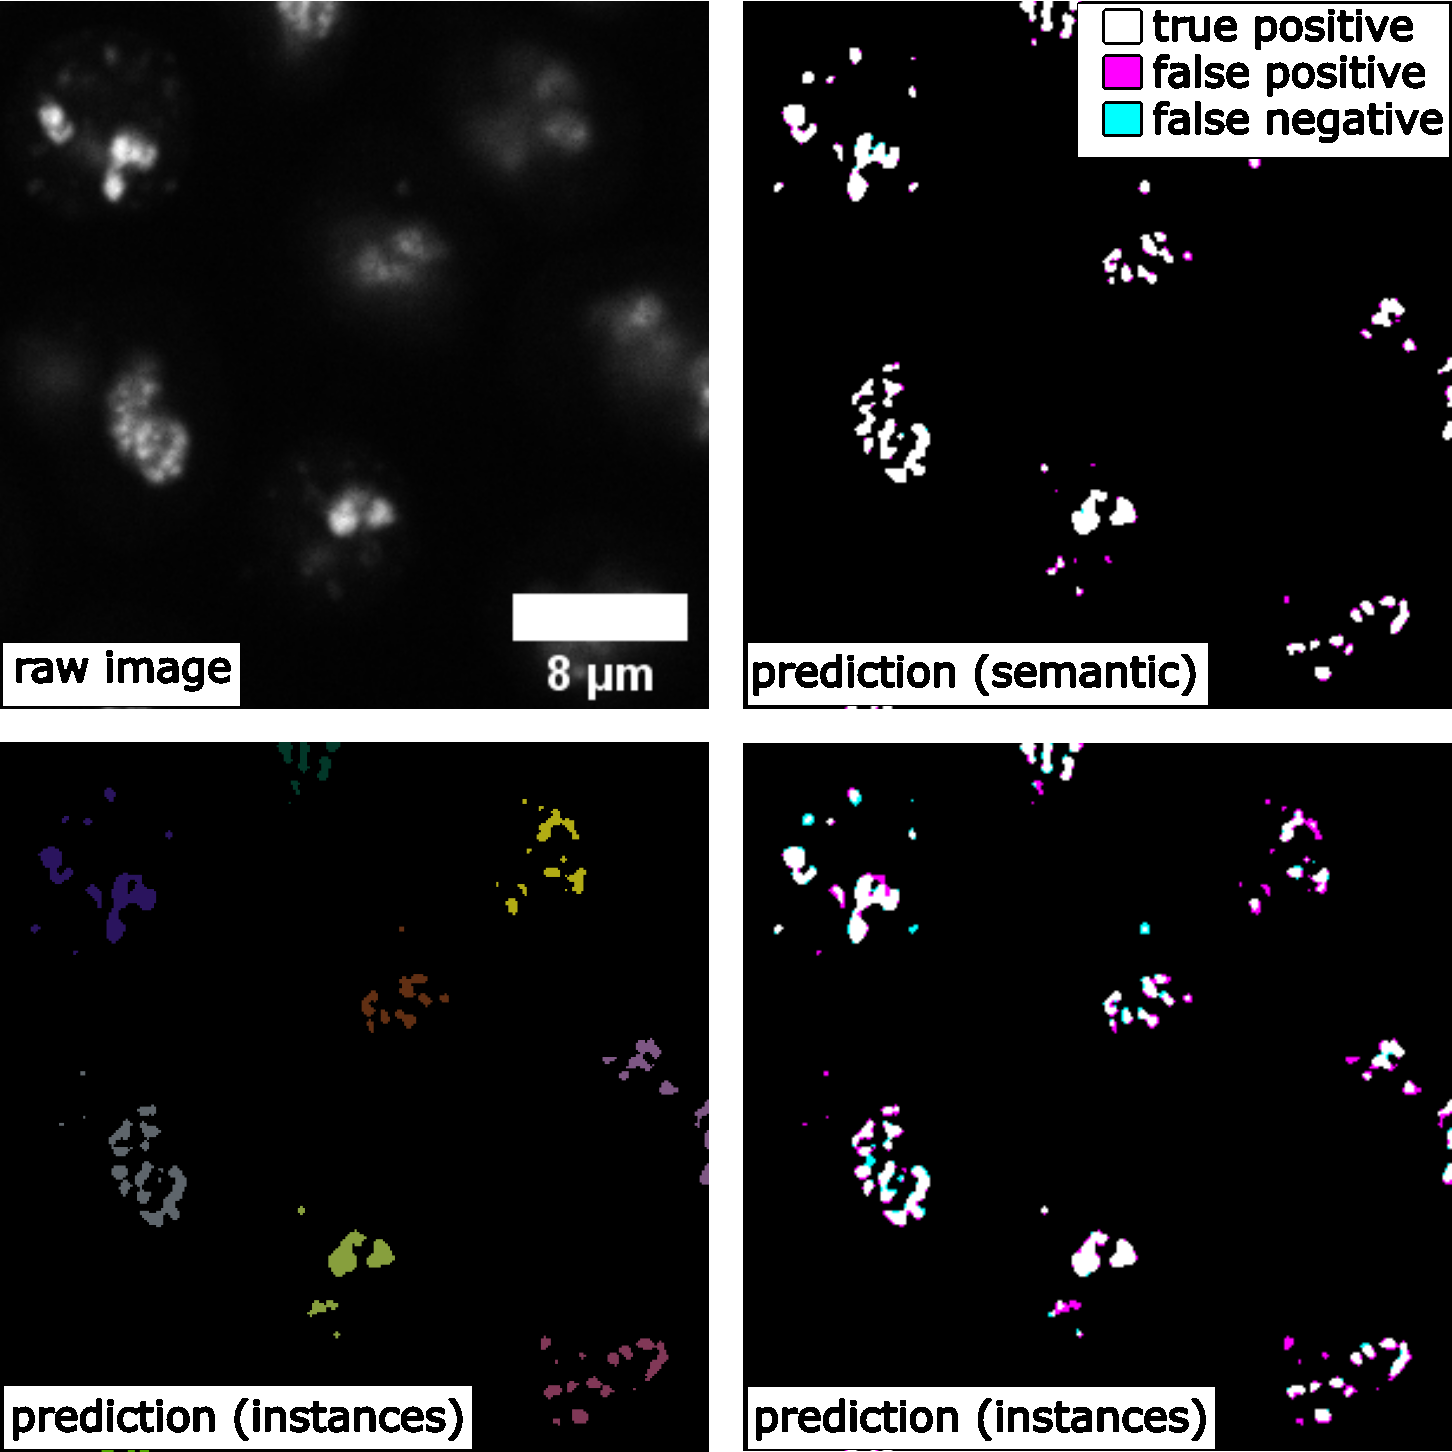 Figure 6: Comparing 3D semantic segmentation and 3D instance segmentation results on confocal microscopy images of fibrillarin (showing a middle Z-slice of a 3D stack). Shown are the raw image, the prediction of the instance segmentation, and for both segmentations a mask that gives an overview of true positive, false negative, and false positive pixels.